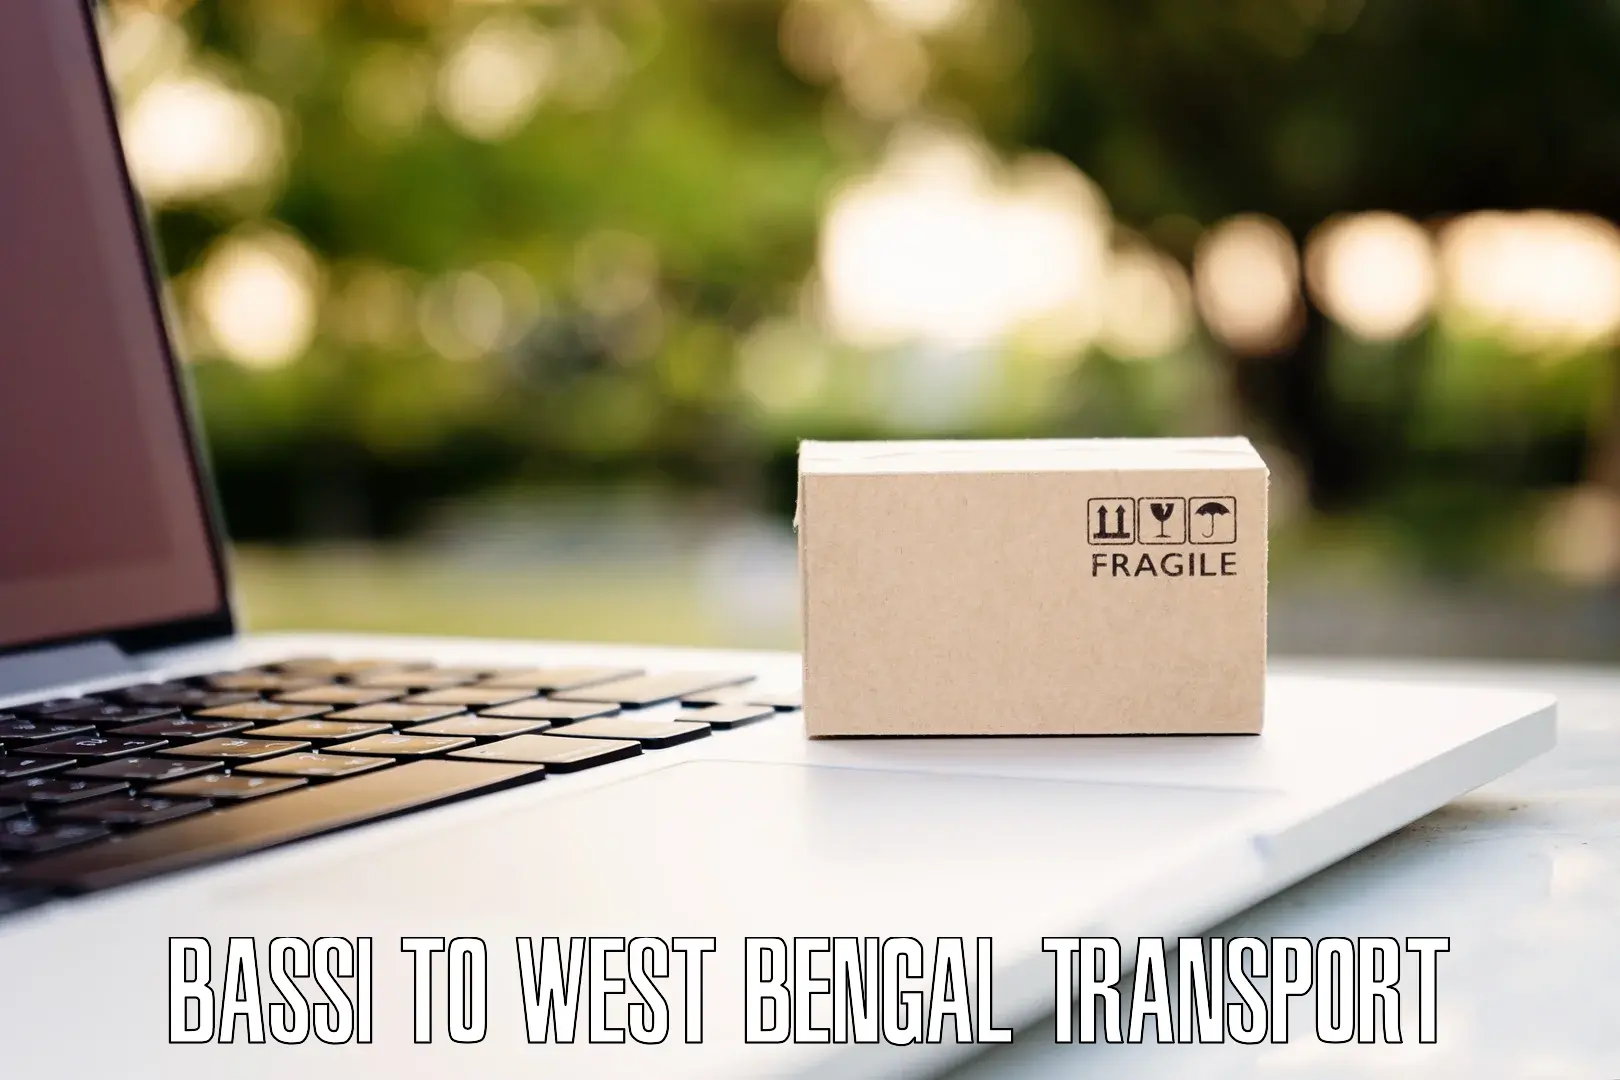 Online transport service Bassi to West Bengal